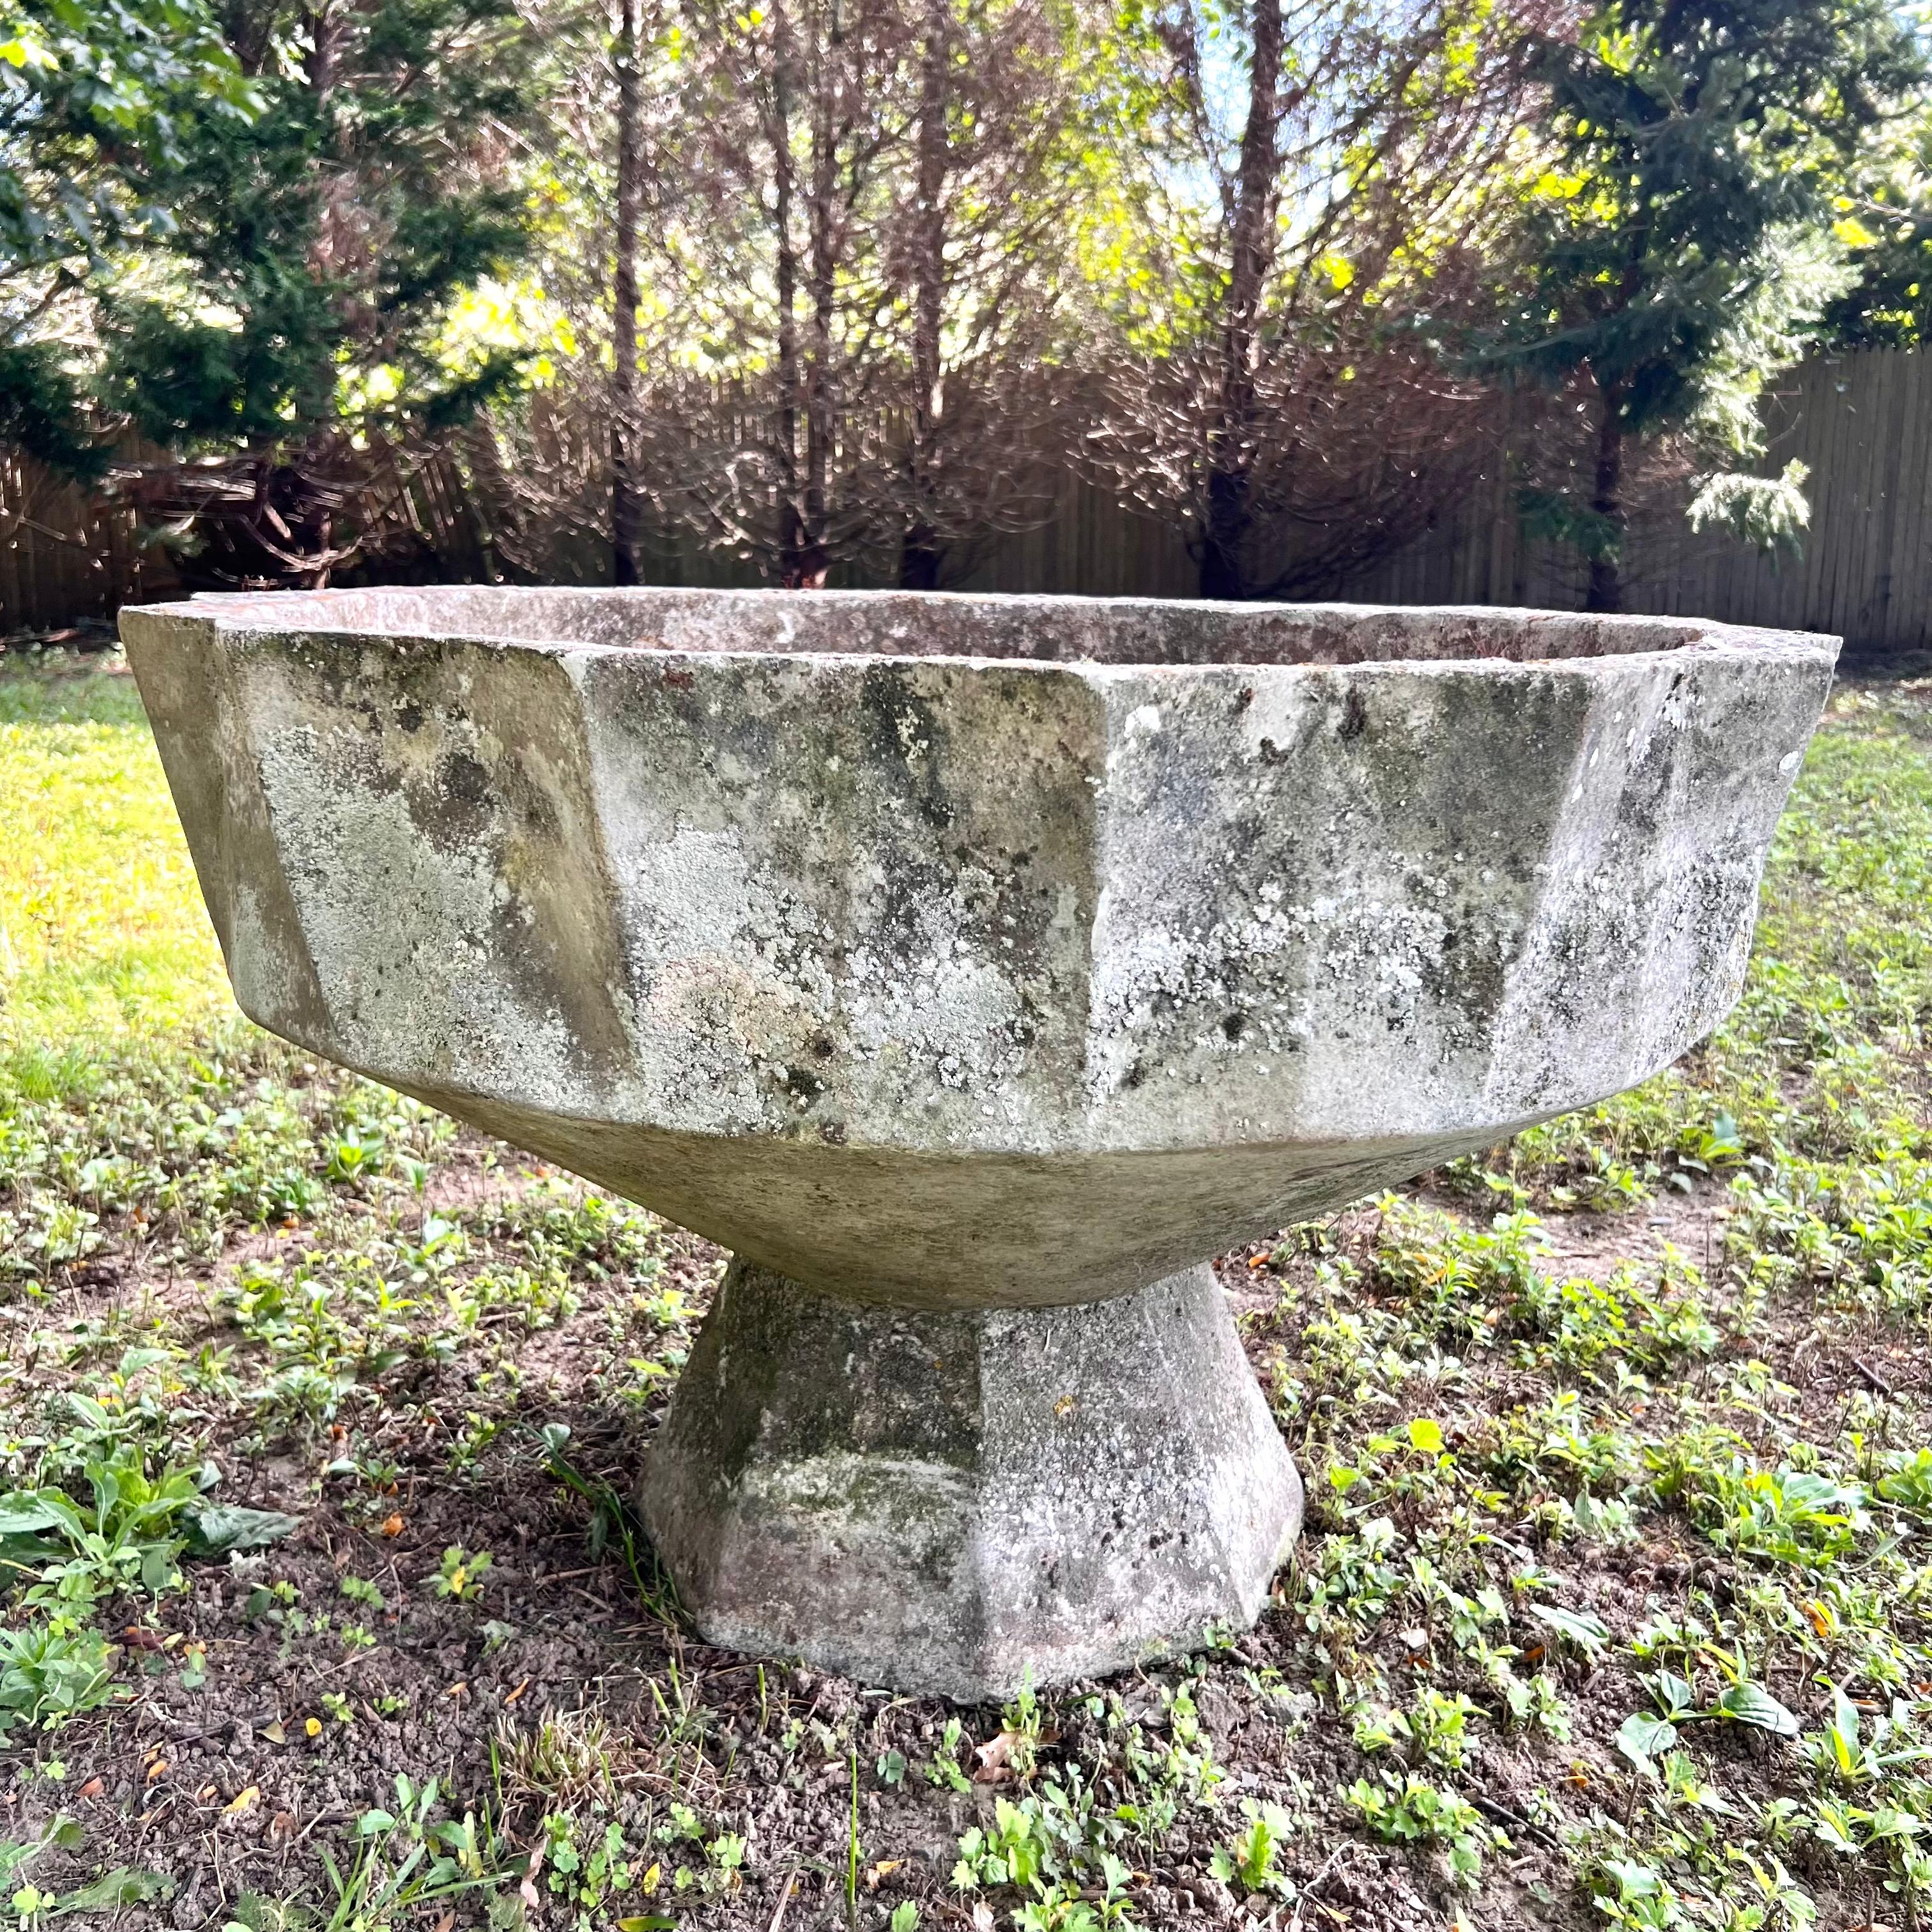 Unique concrete planter by Swiss architect Willy Guhl. Planter in the shape of a chalice with faceted edges along the top and bottom. Great age and patina from decades of European winters. Massive, rare size. Good vintage condition. One other